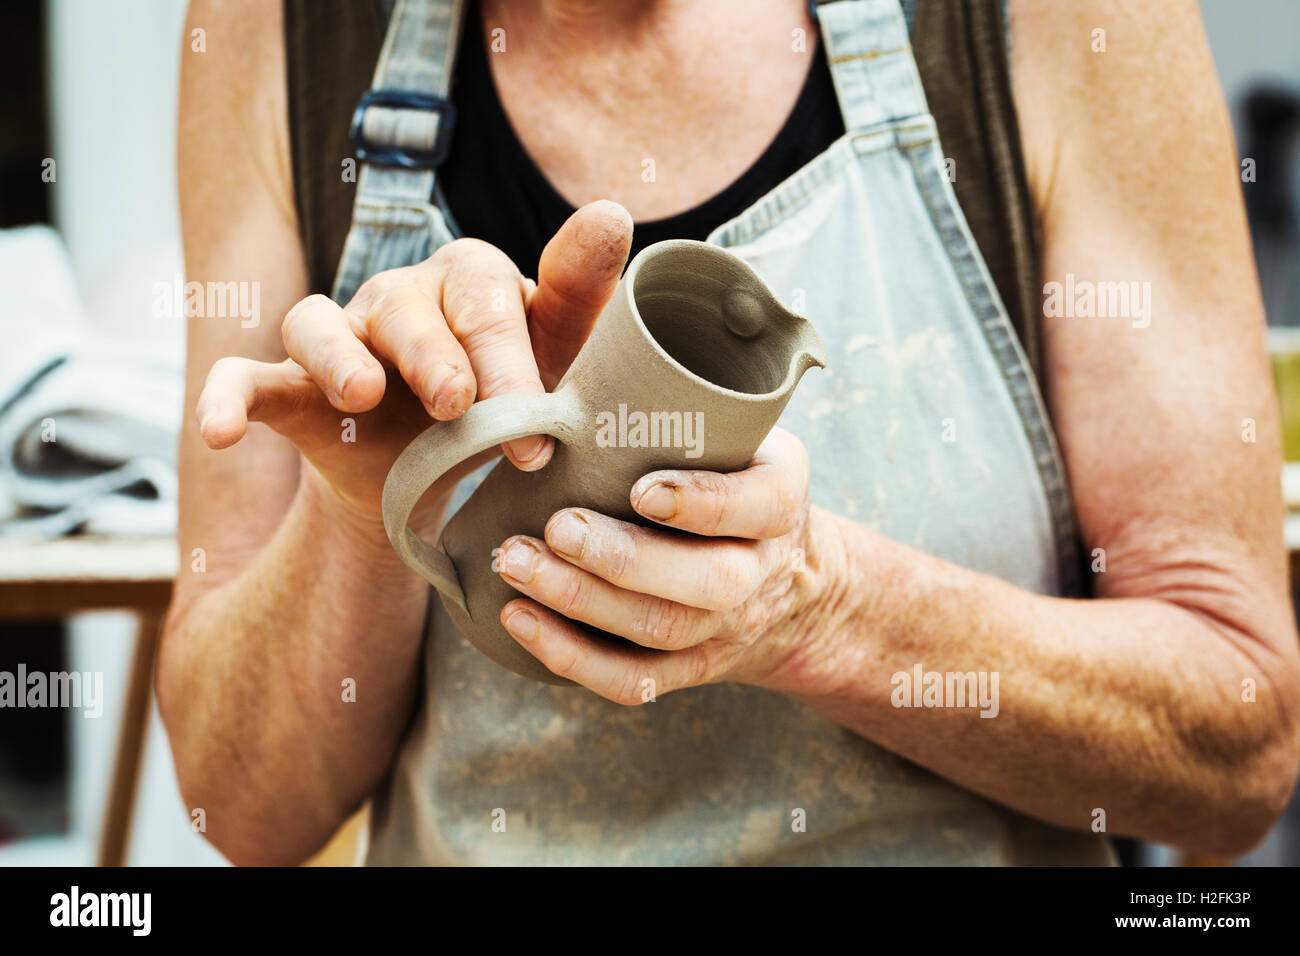 A potter handling a wet clay pot, smoothing clay and preparing it for kiln firing. Stock Photo